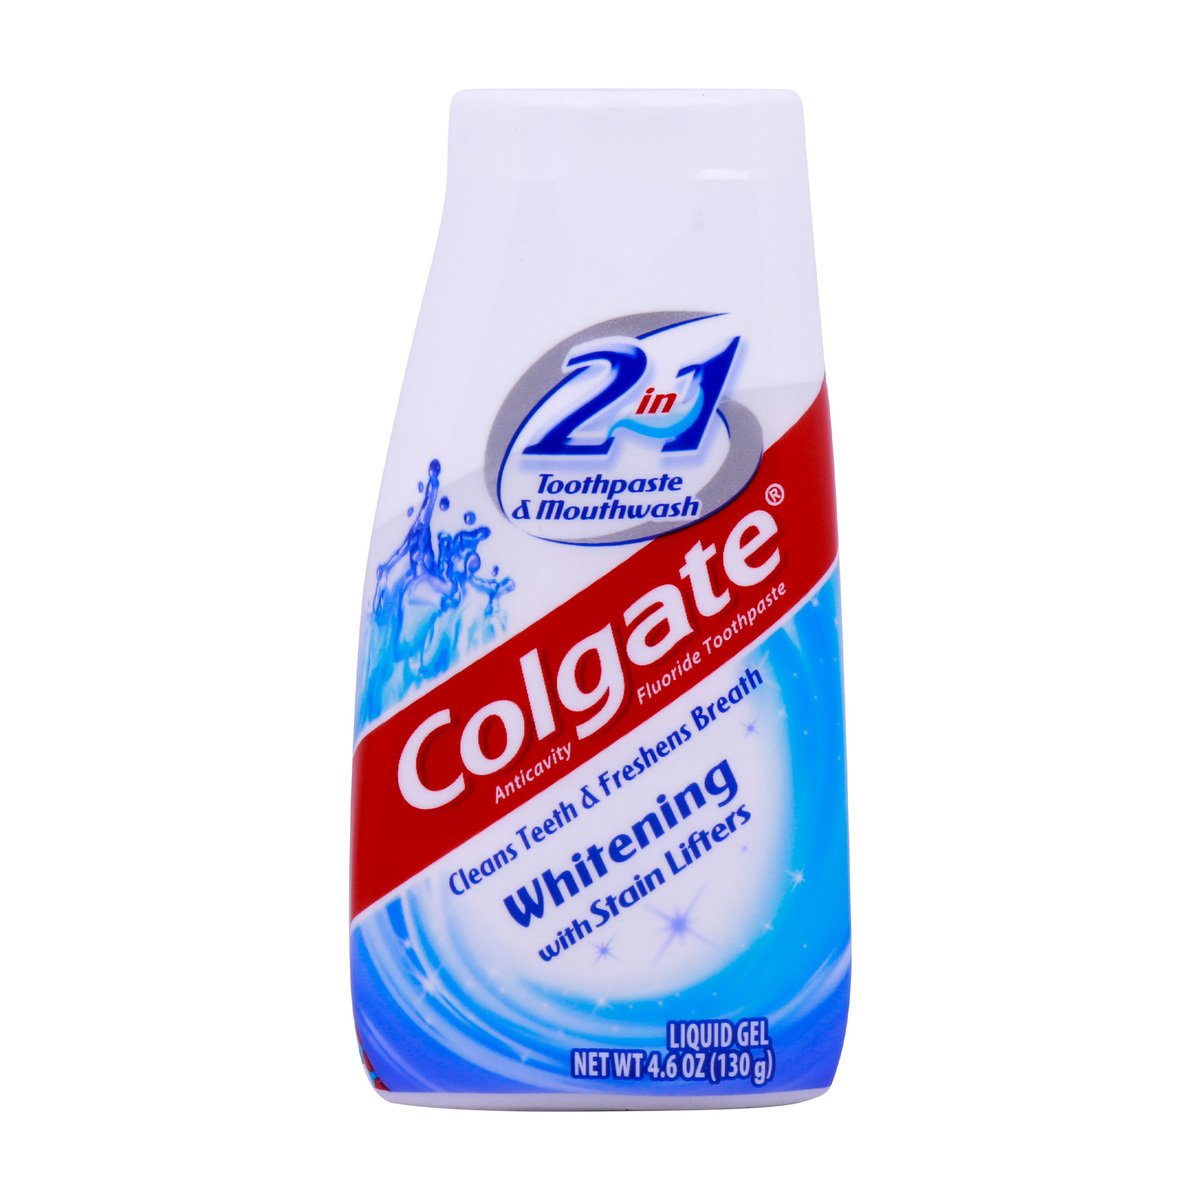 Colgate Toothpaste & Mouthwash 2in1 Whitening With Stain Lifters 130g